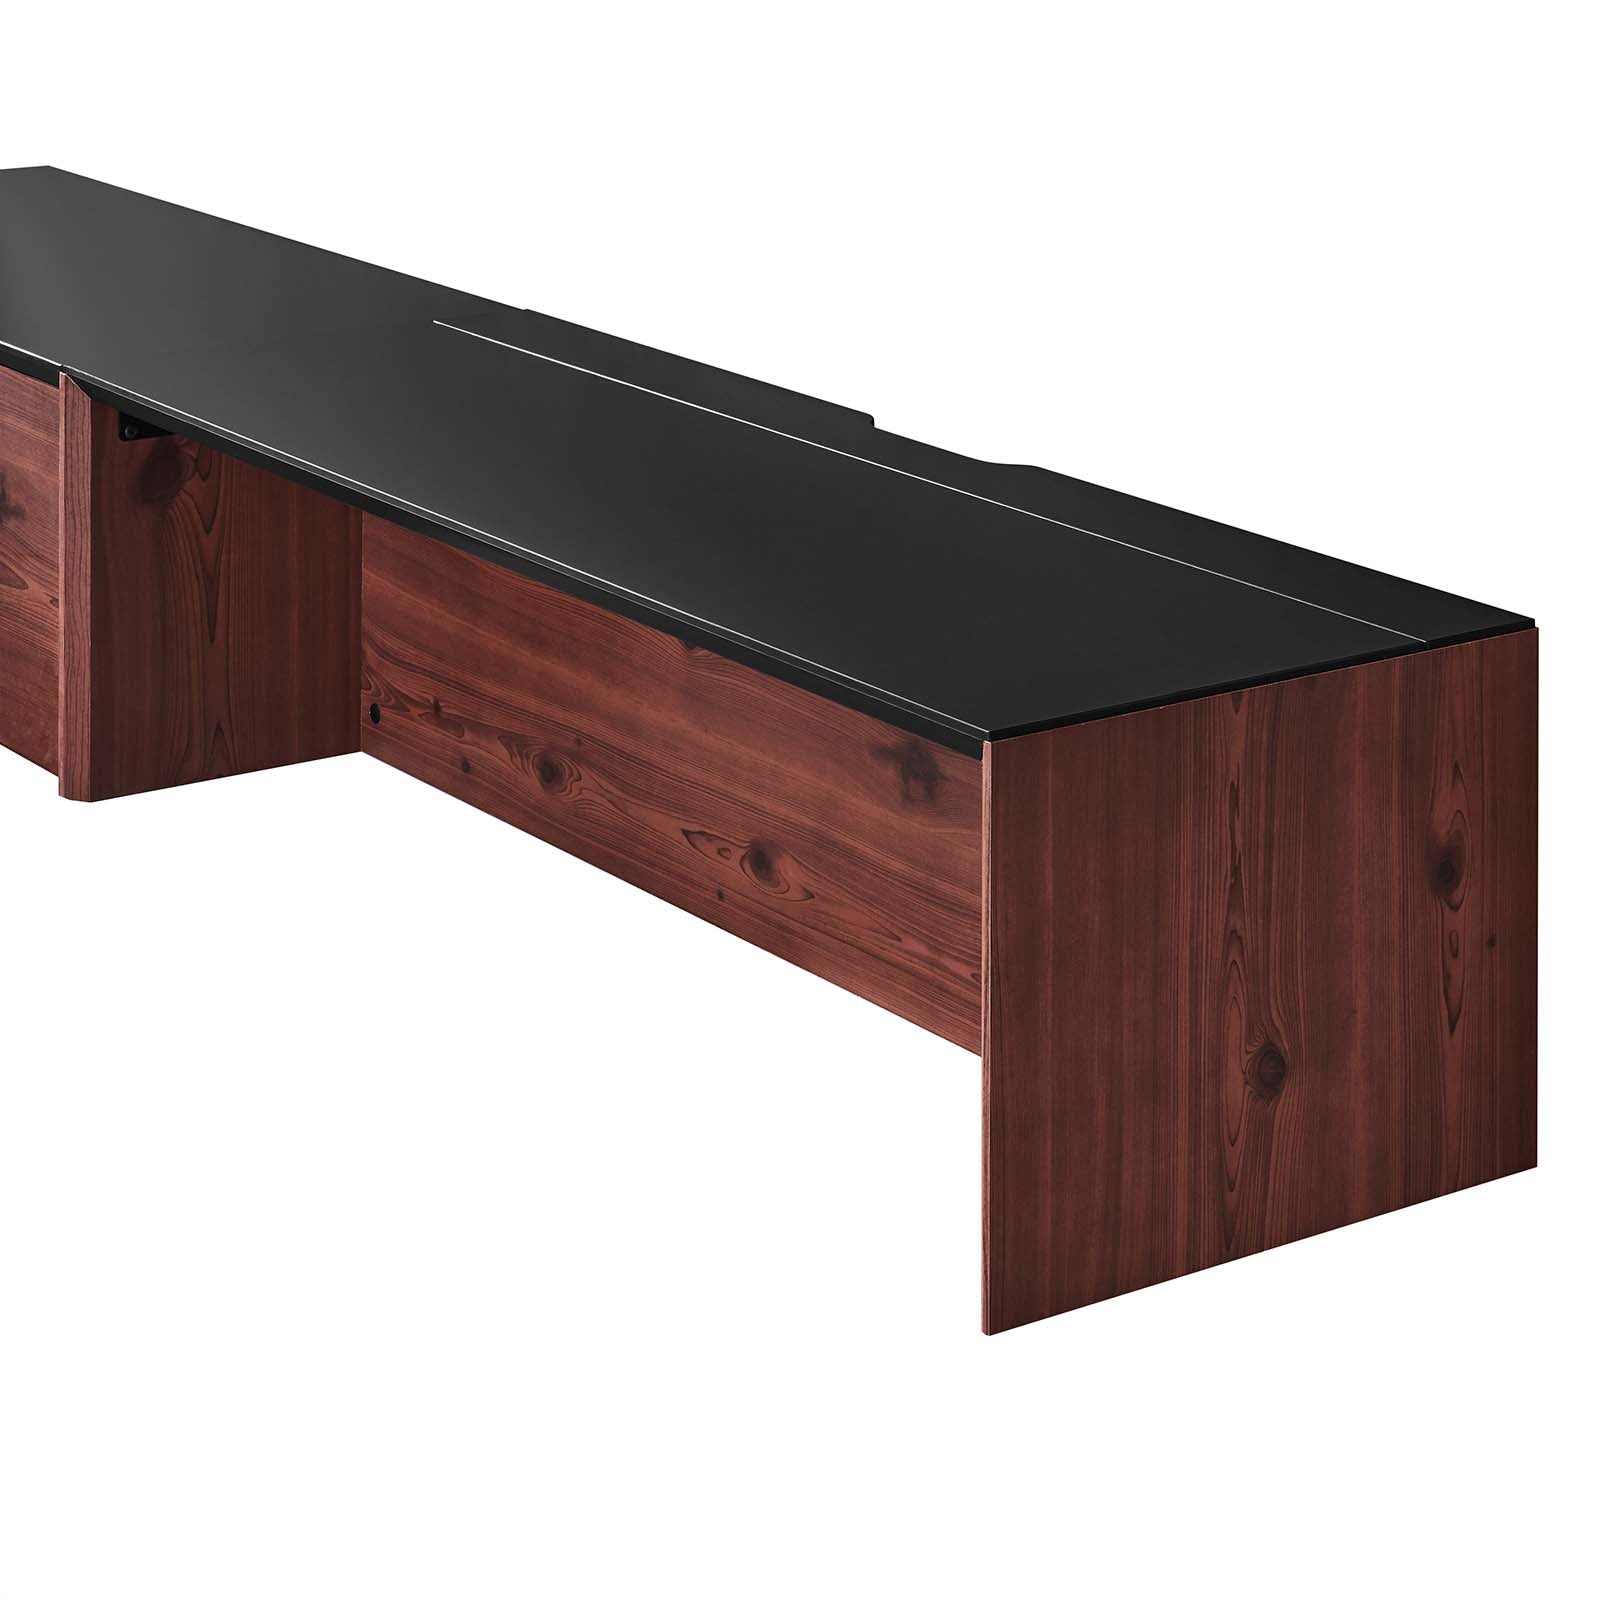 Kinetic 49" Wall-Mount Office Desk With Cabinet and Shelf - East Shore Modern Home Furnishings